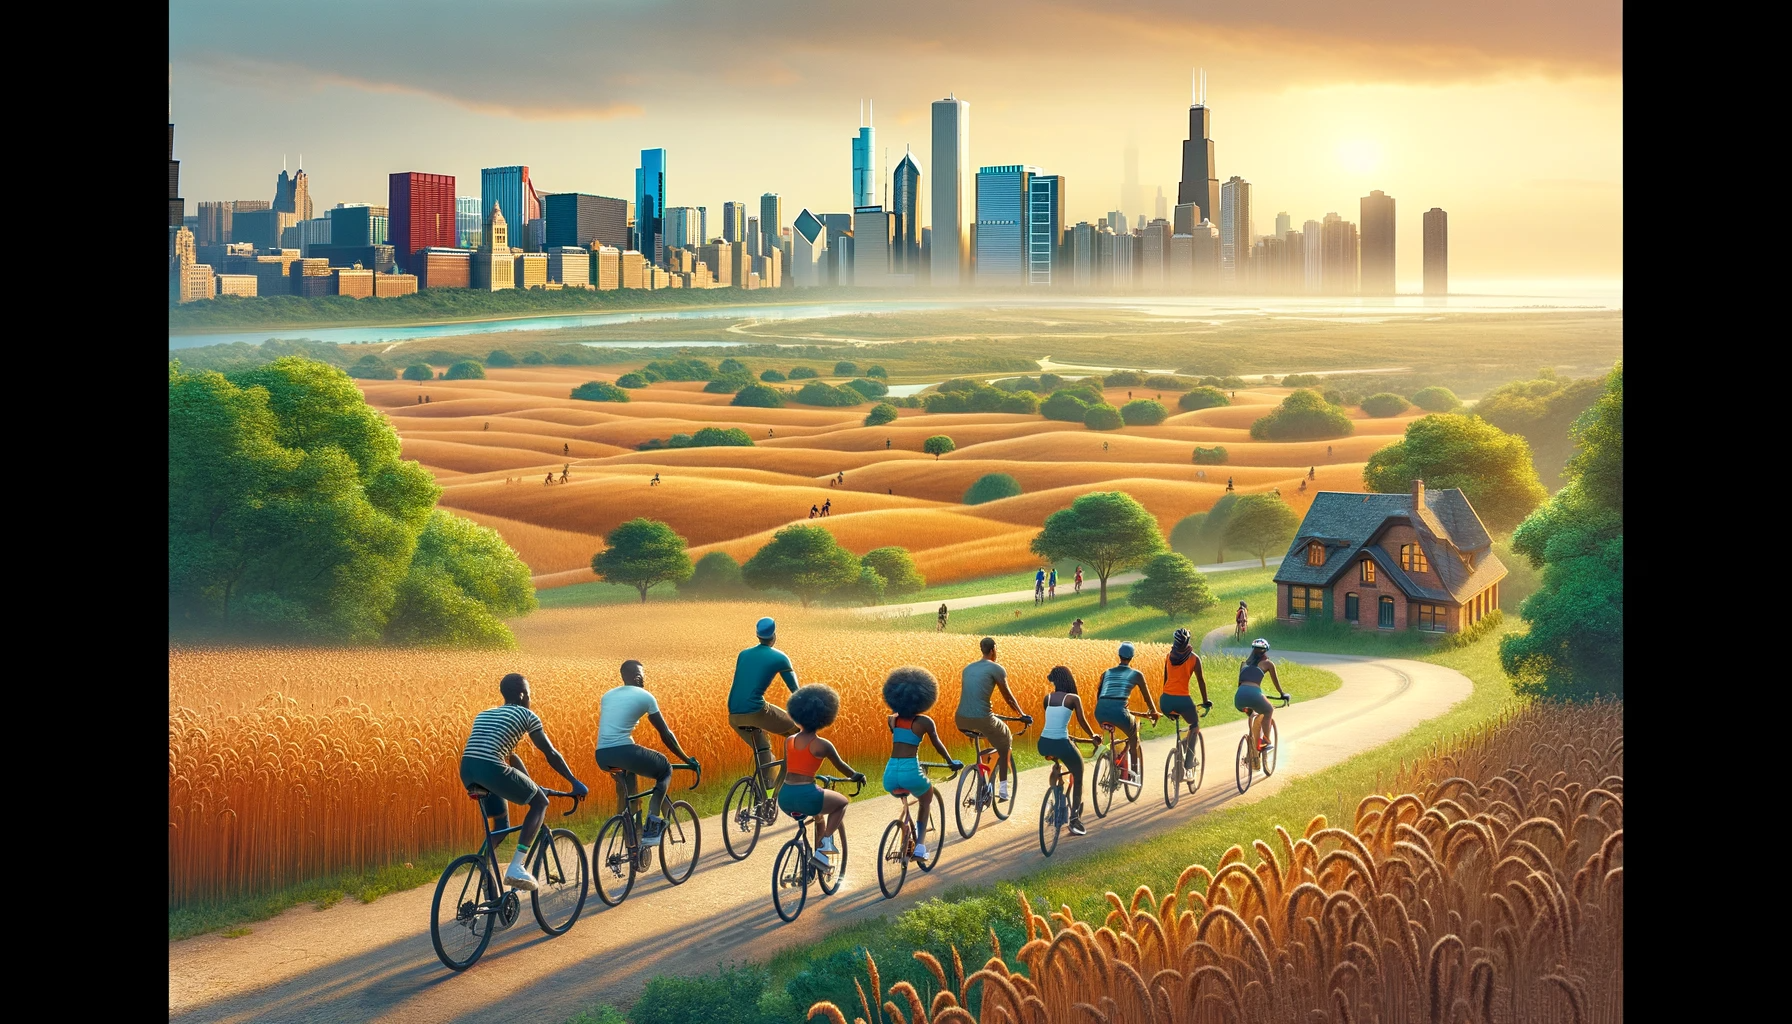 Journey Begins: Cycling Together Along Chicago's Lakefront